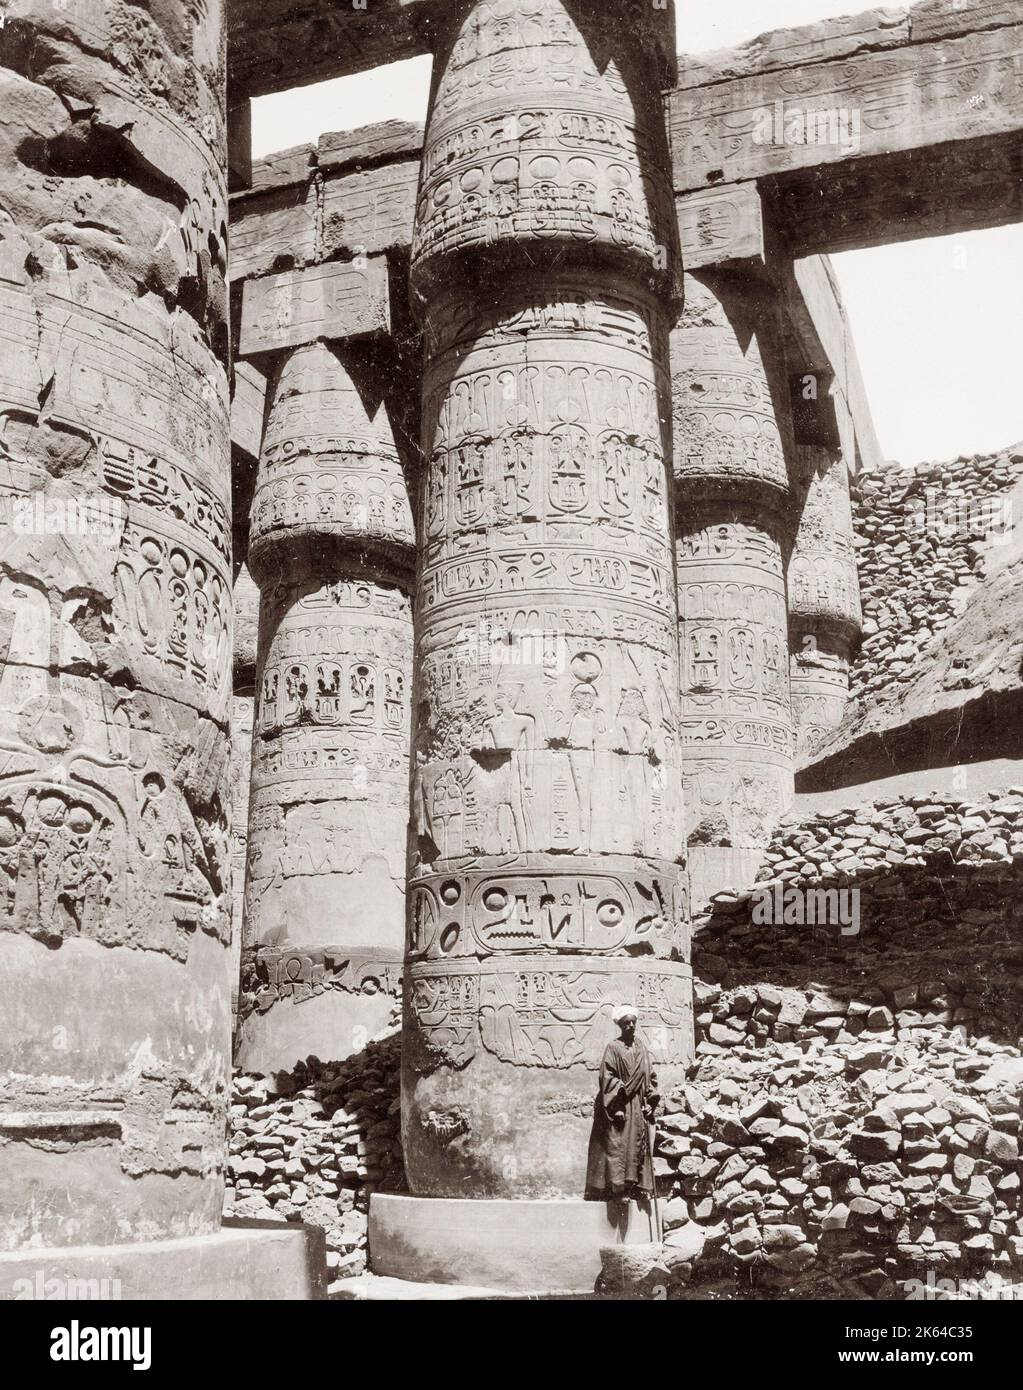 Vintage 19th century photograph: carved pillar ancient ruins, Egypt, with figure. Stock Photo